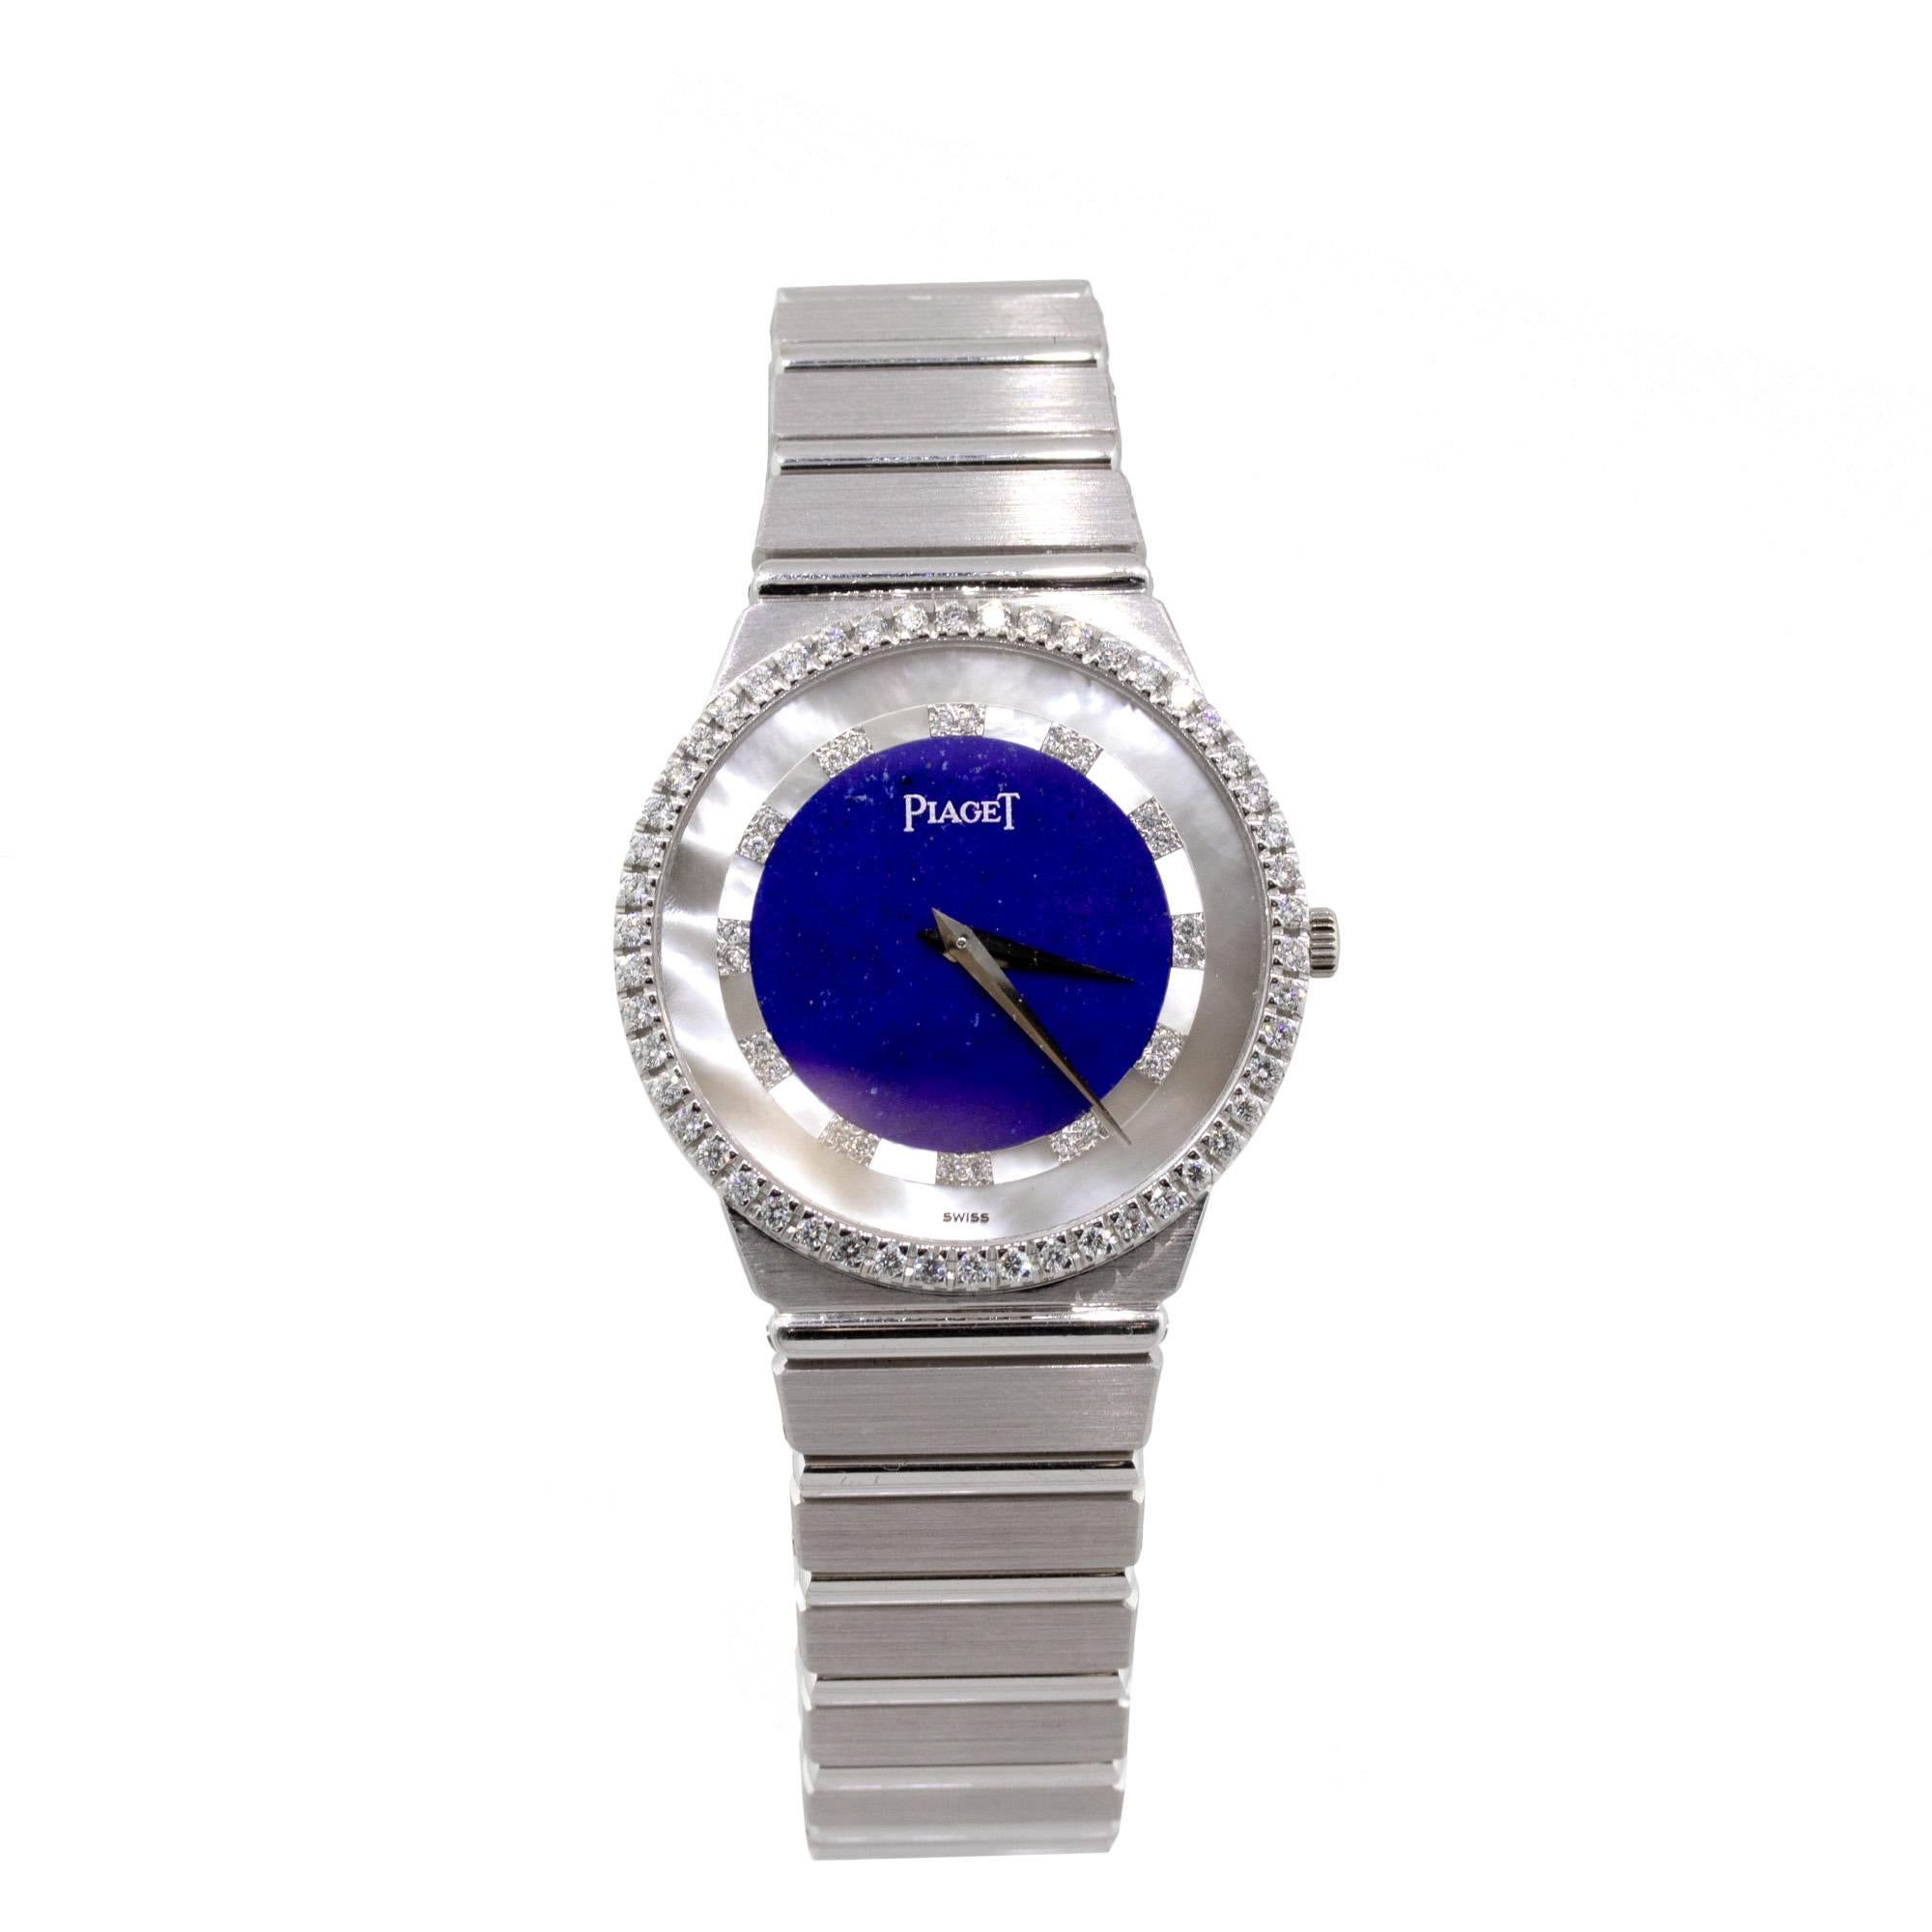 Brand: Piaget
Case Material: 18k white gold
Case Diameter: 36mm
Crystal: Plastic
Bezel: Factory 18k White Gold with Diamonds
Dial: Factory Lapis Lazuli and Mother of Pearl
Bracelet: 18k White Gold Bracelet
Size: Will fit a 6″ wrist
Clasp: 18k White